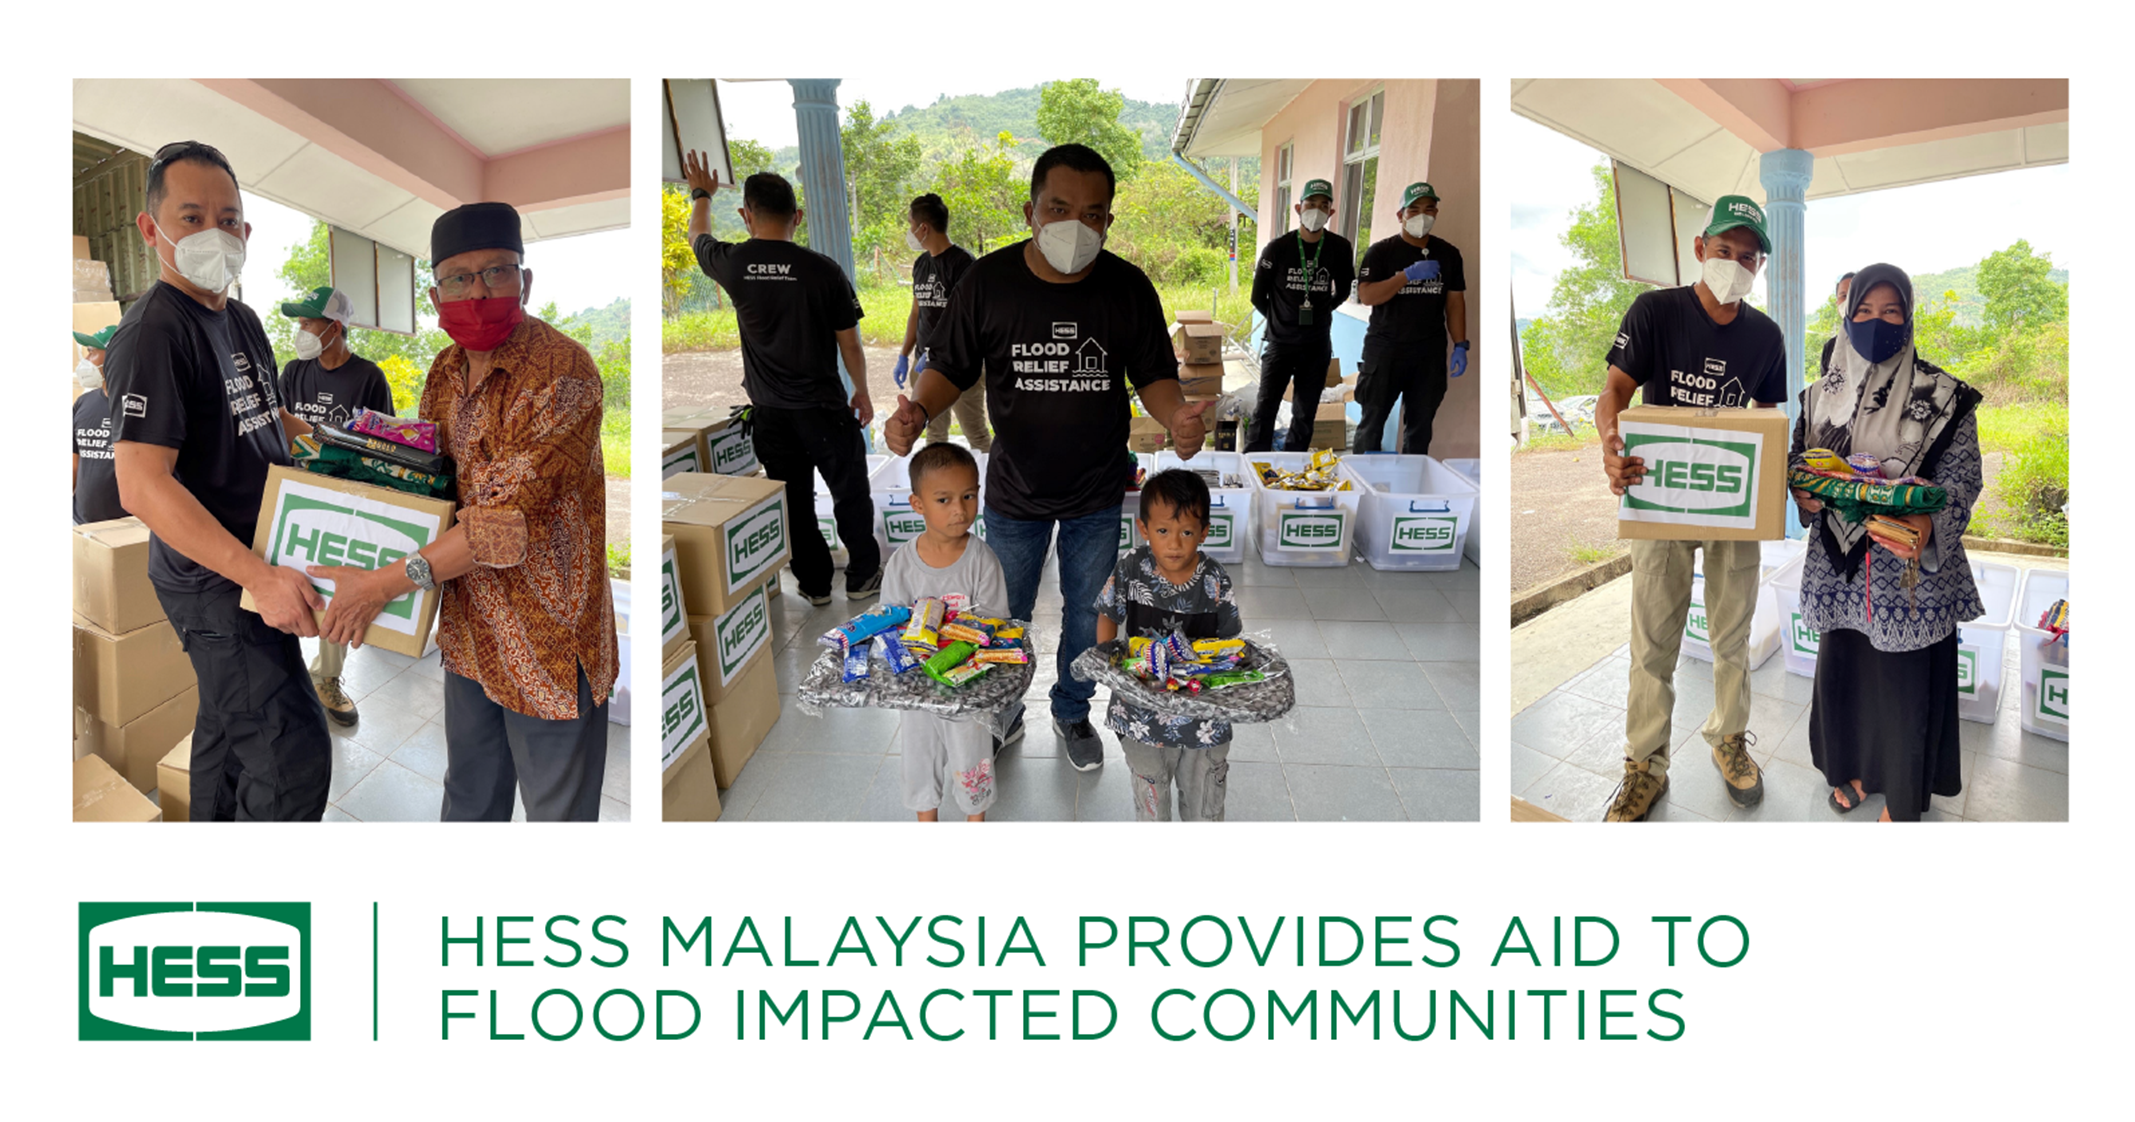 Hess Malaysia Provides Aid to Flood Impacted Communities